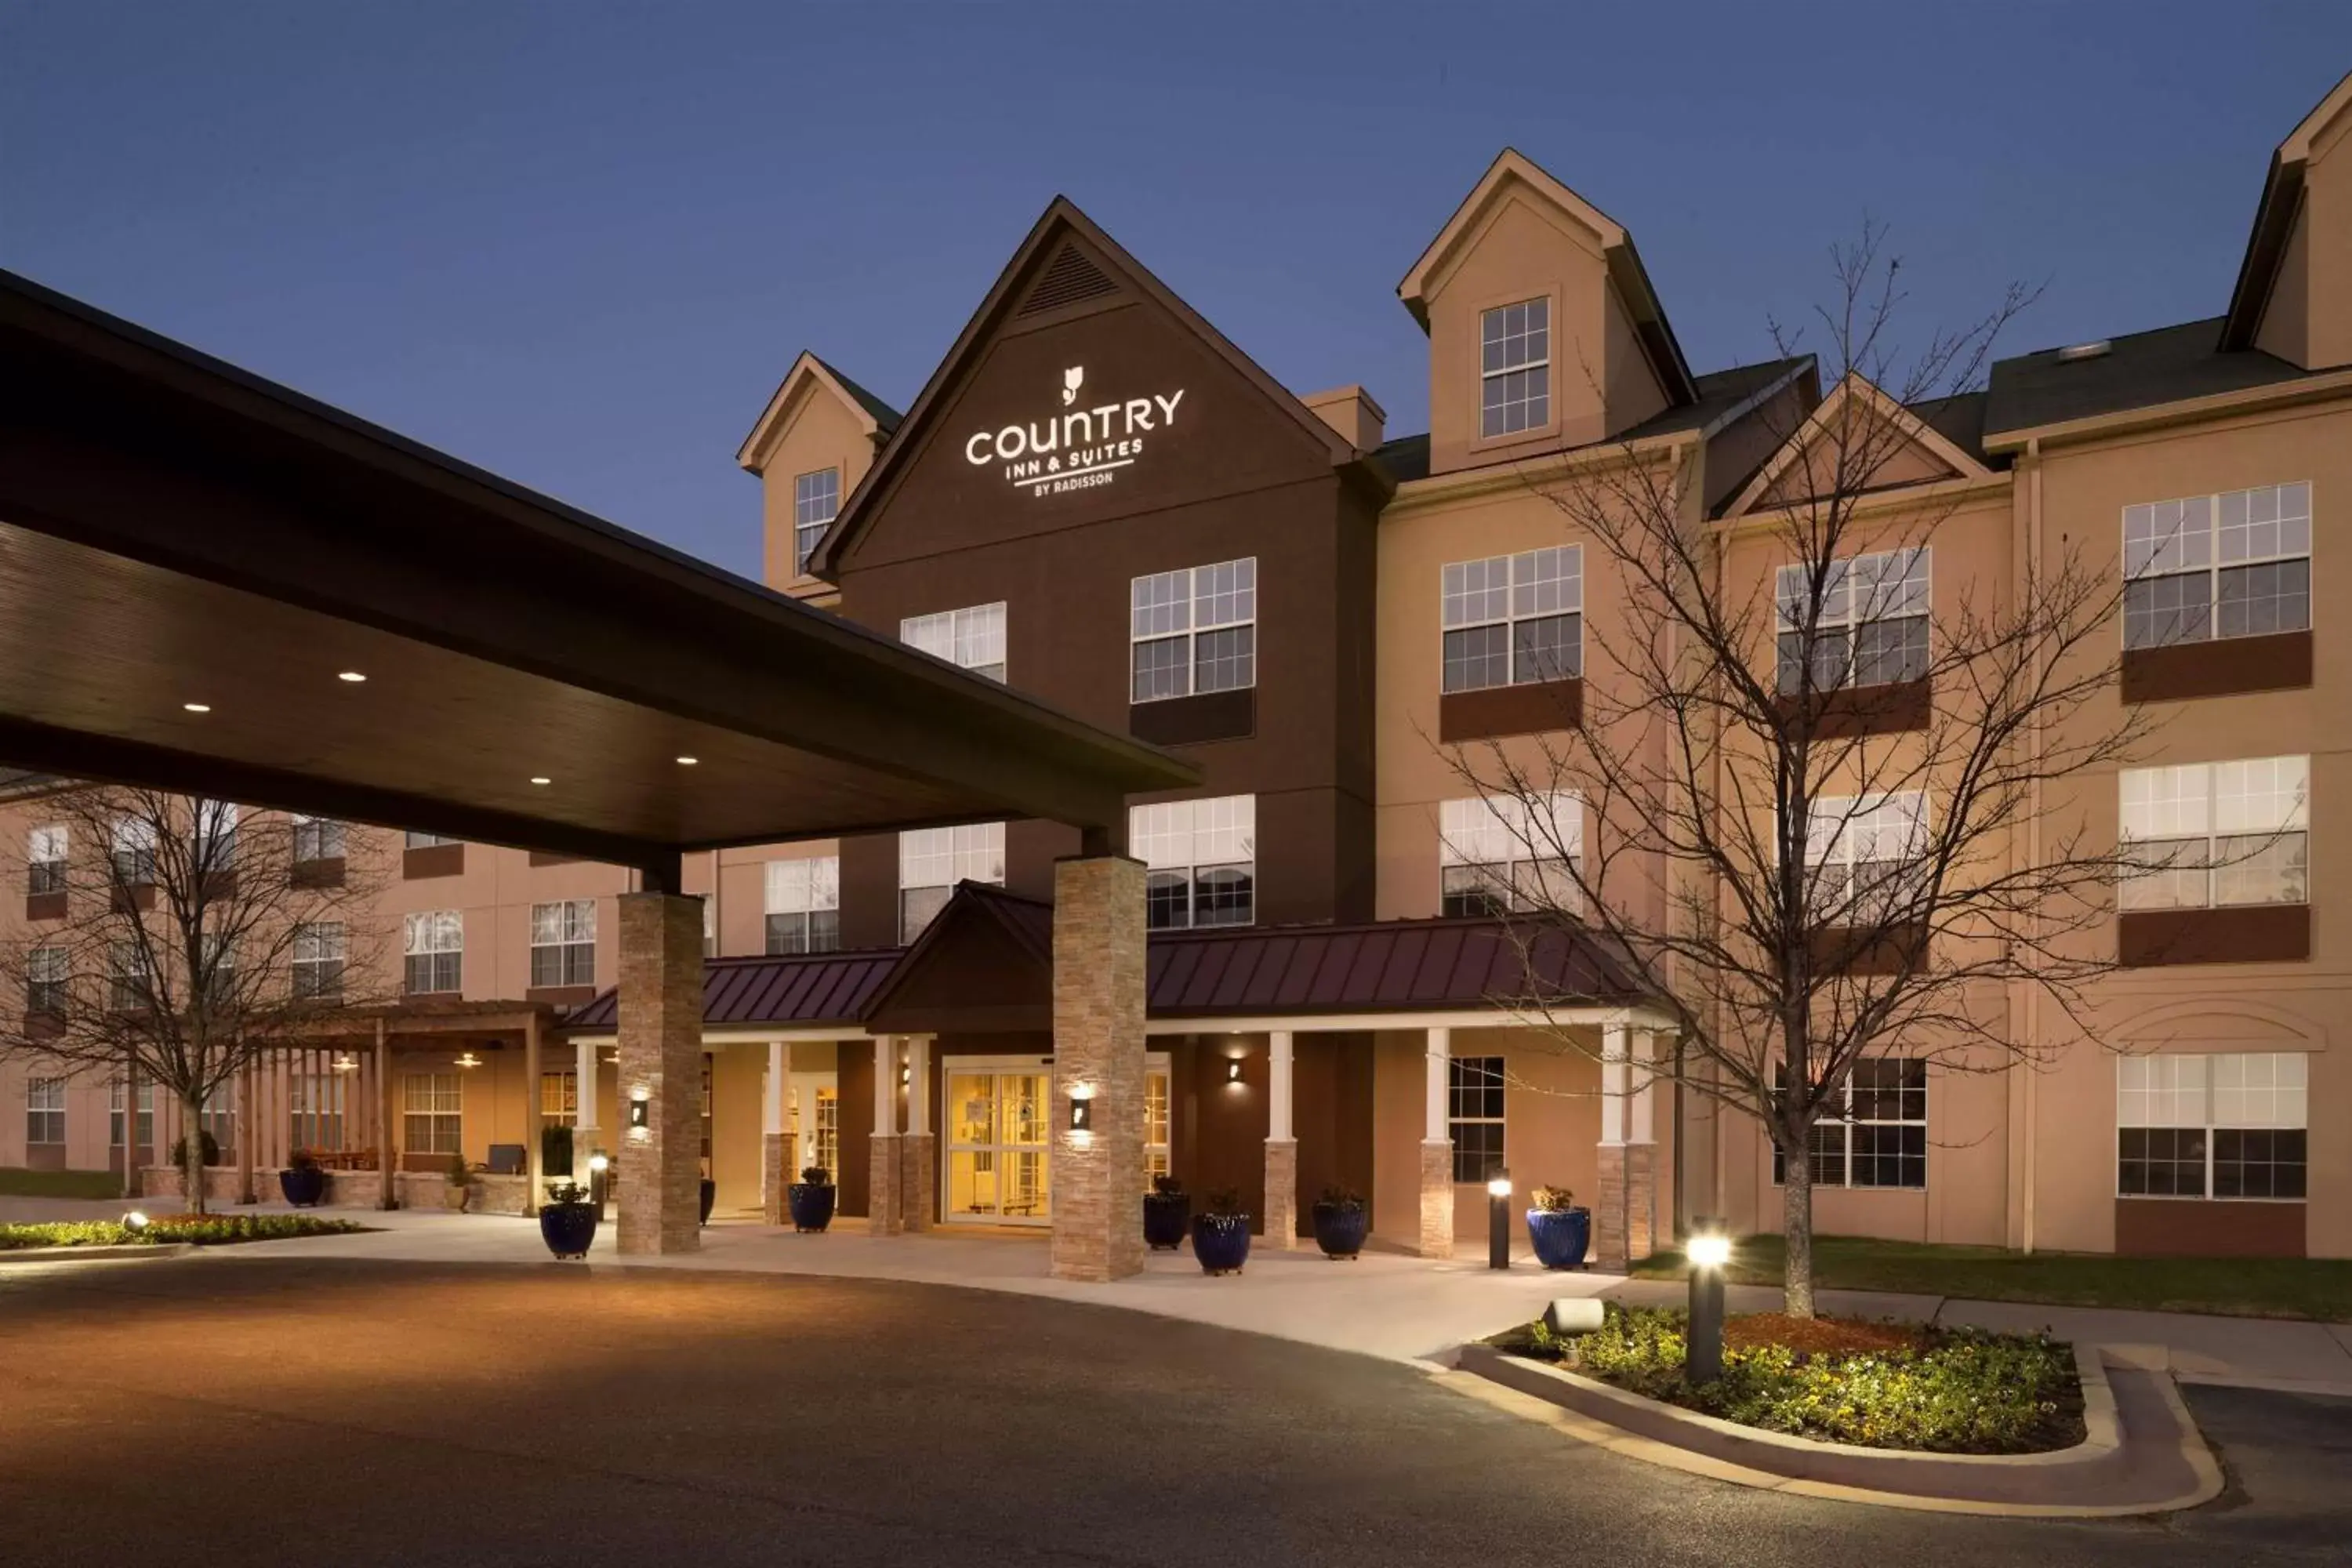 Property building in Country Inn & Suites by Radisson, Aiken, SC